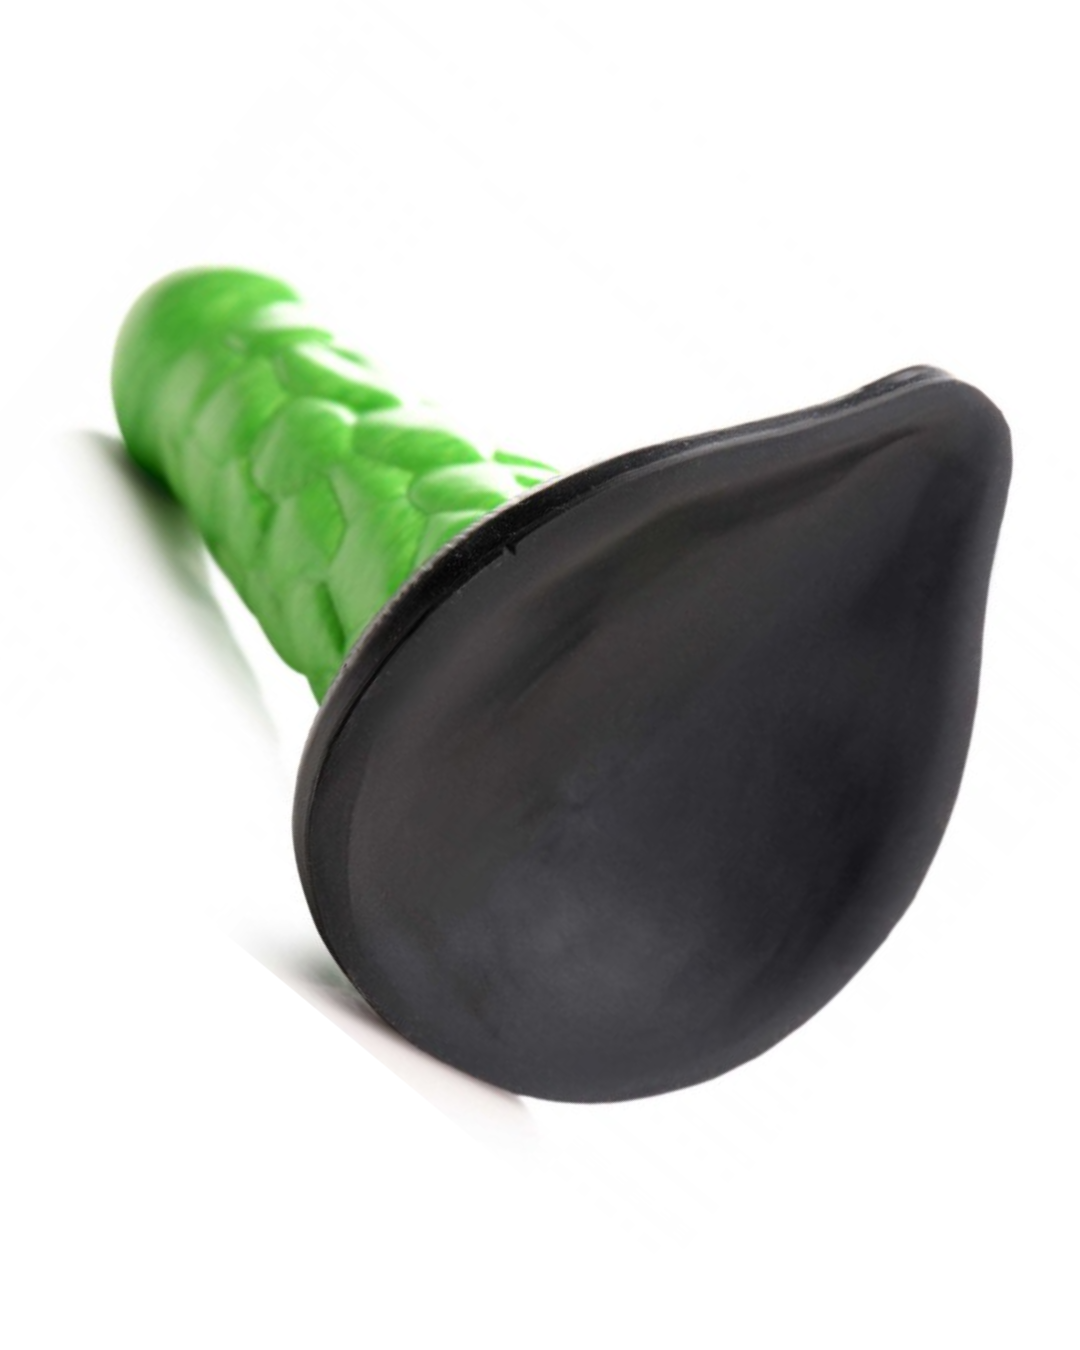 Radioactive Reptile Scaly Thick 7.5 Inch Silicone Fantasy Dildo close up of suction cup base